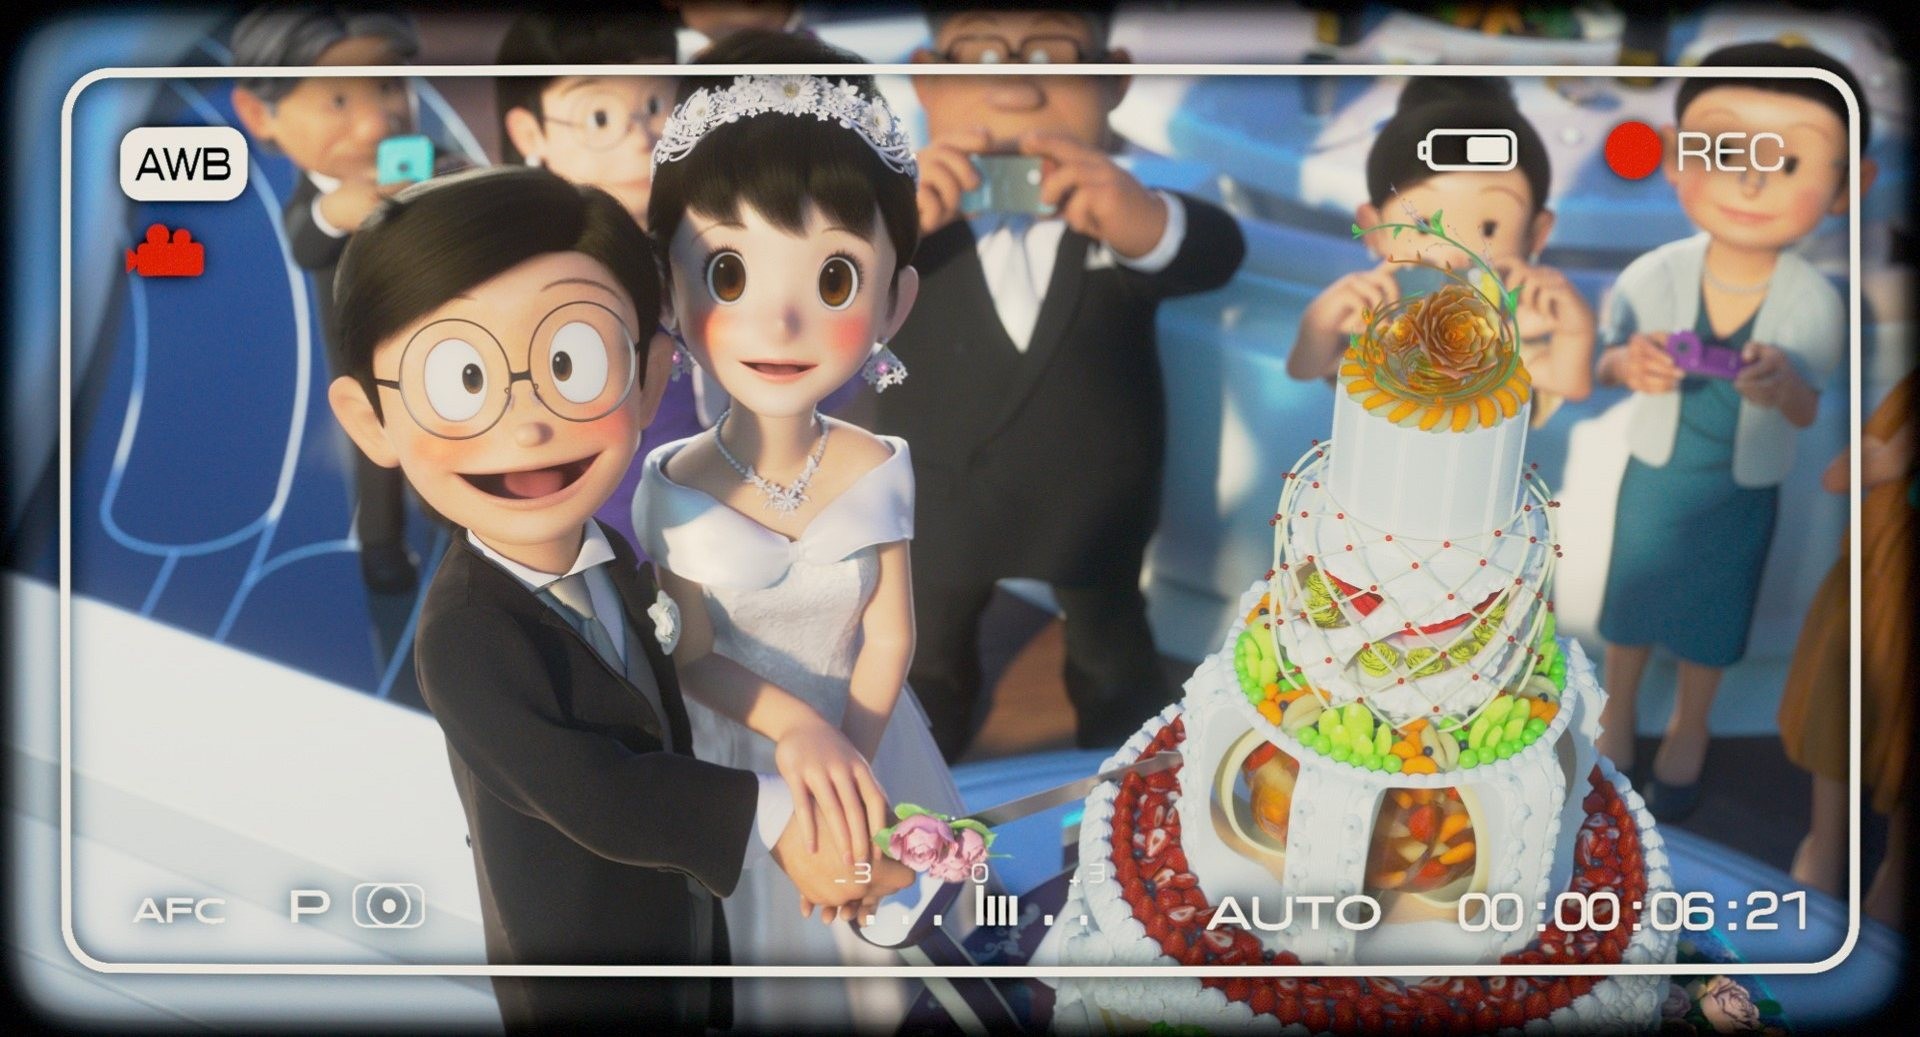 Stand By Me Doraemon 2 Movie Review Nobita Shizuka Finally Get Married In Entertaining Animated Sequel South China Morning Post